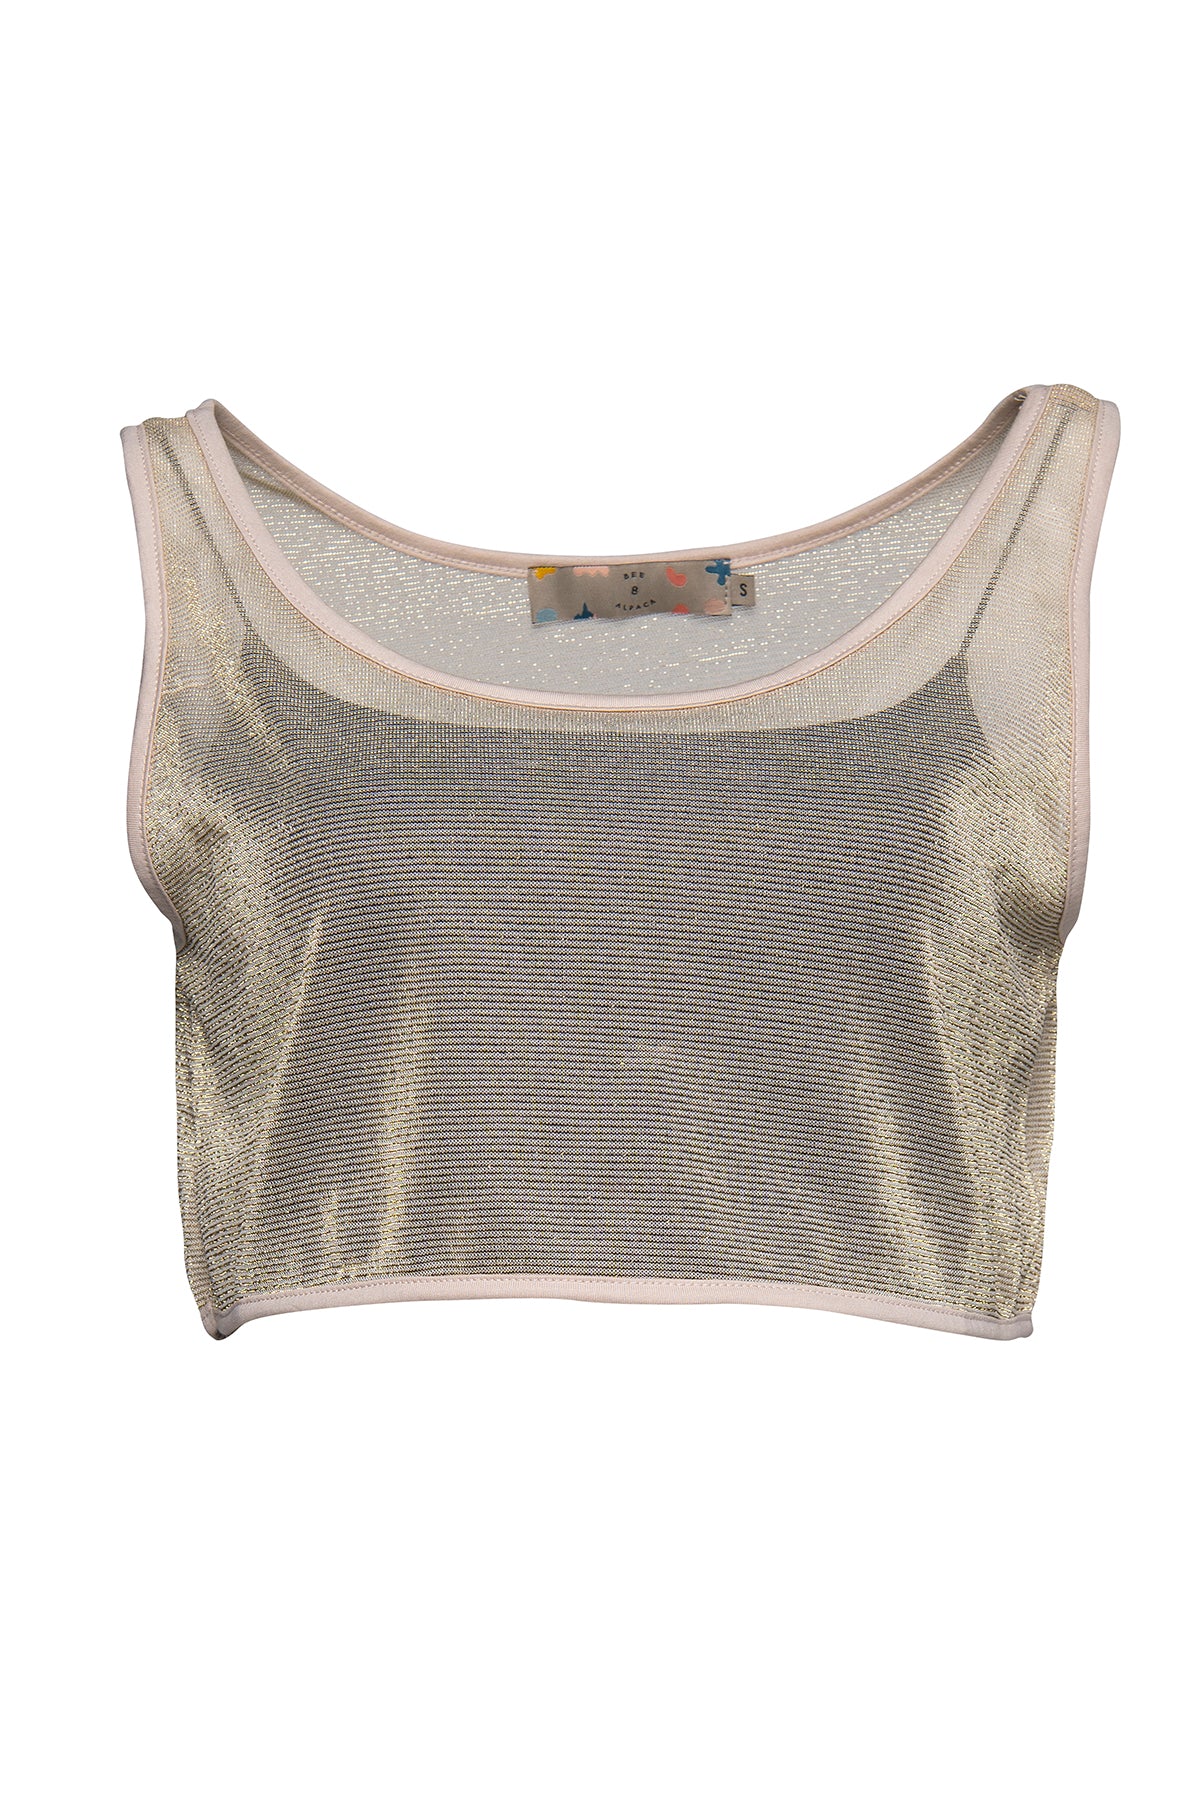 sparkly-light-crop-top-yellow-5